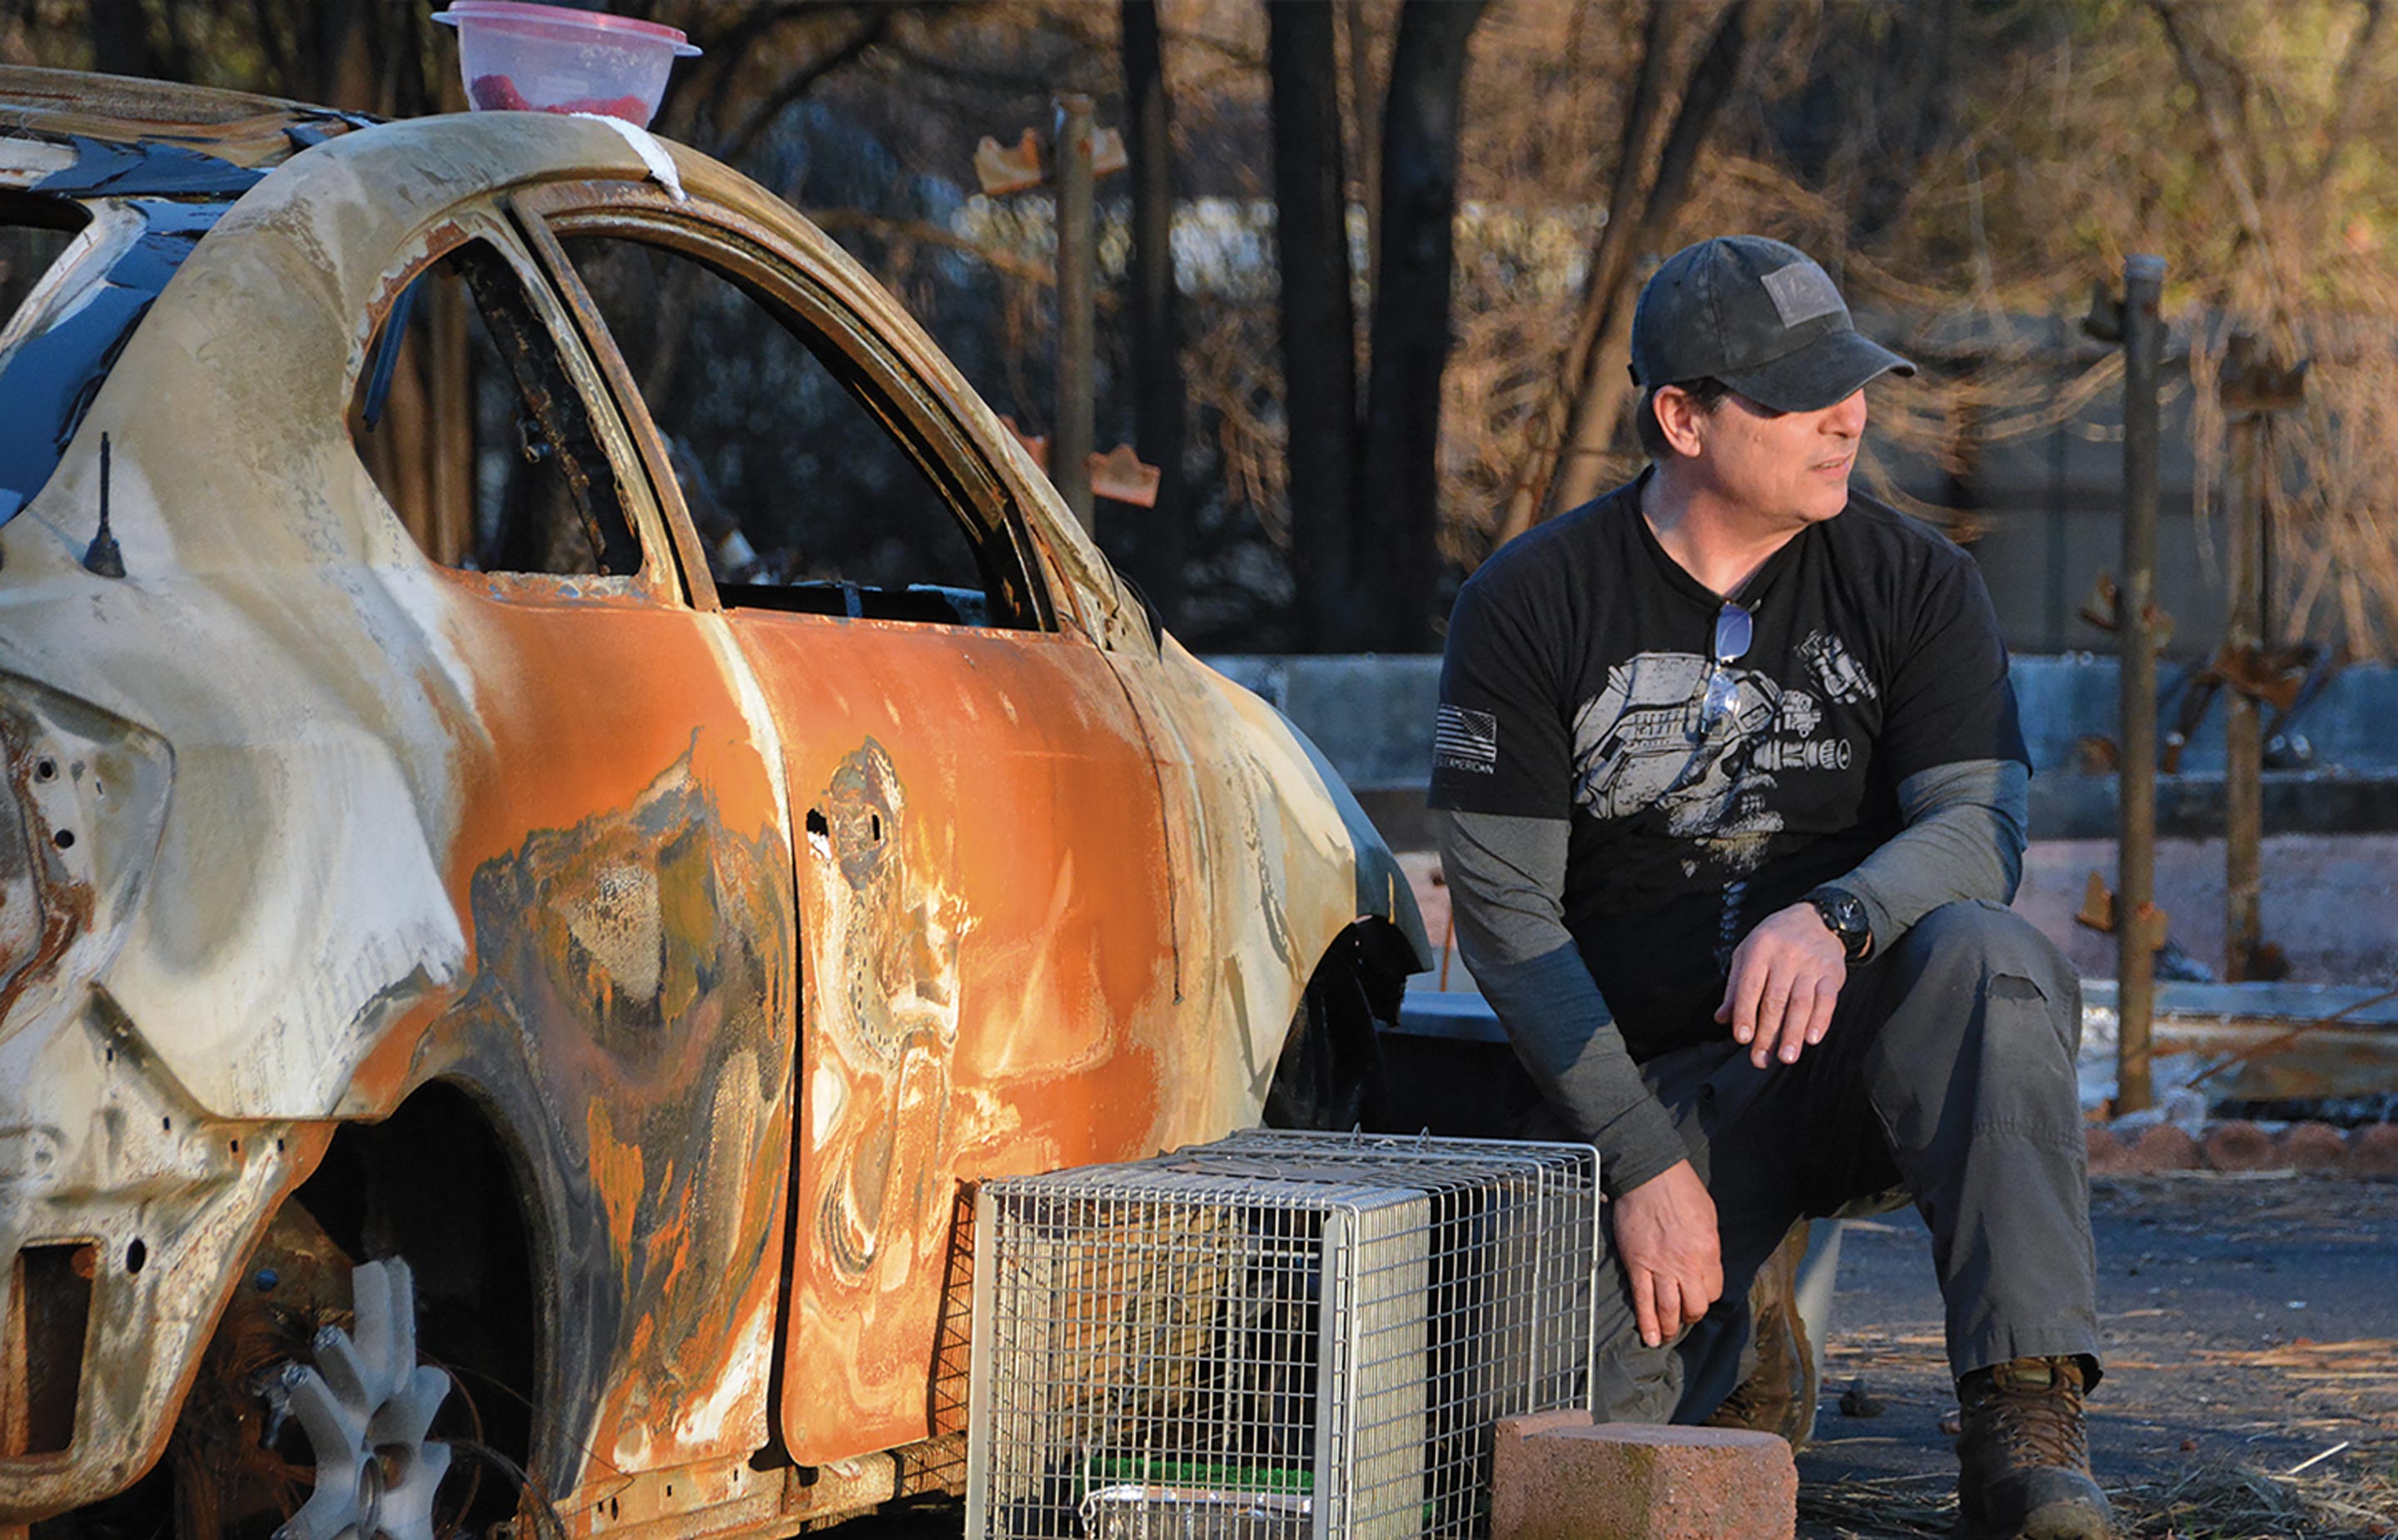 Man next to burnt out car in forest